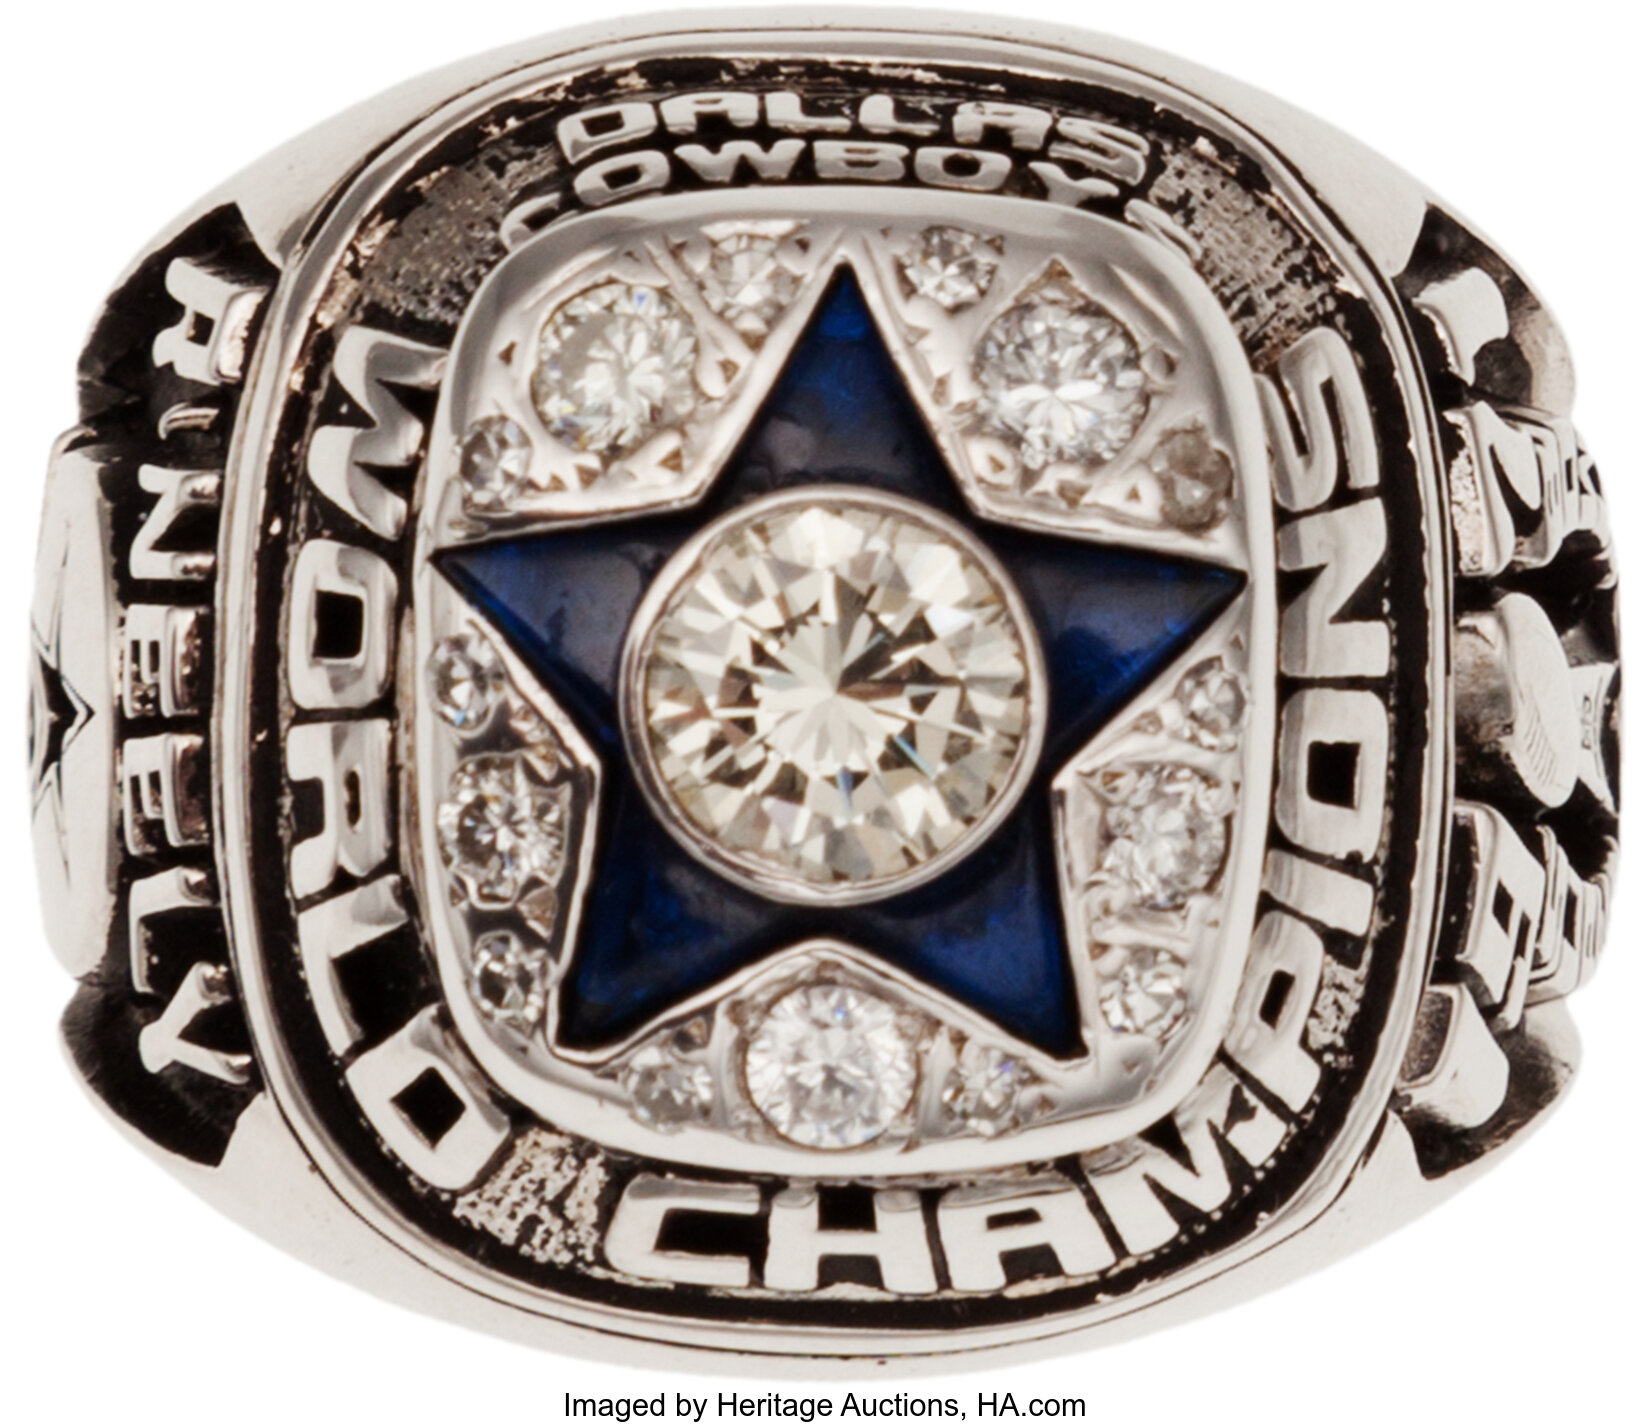 1971 72 Dallas Cowboys Super Bowl Championship Player S Ring Lot 81905 Heritage Auctions